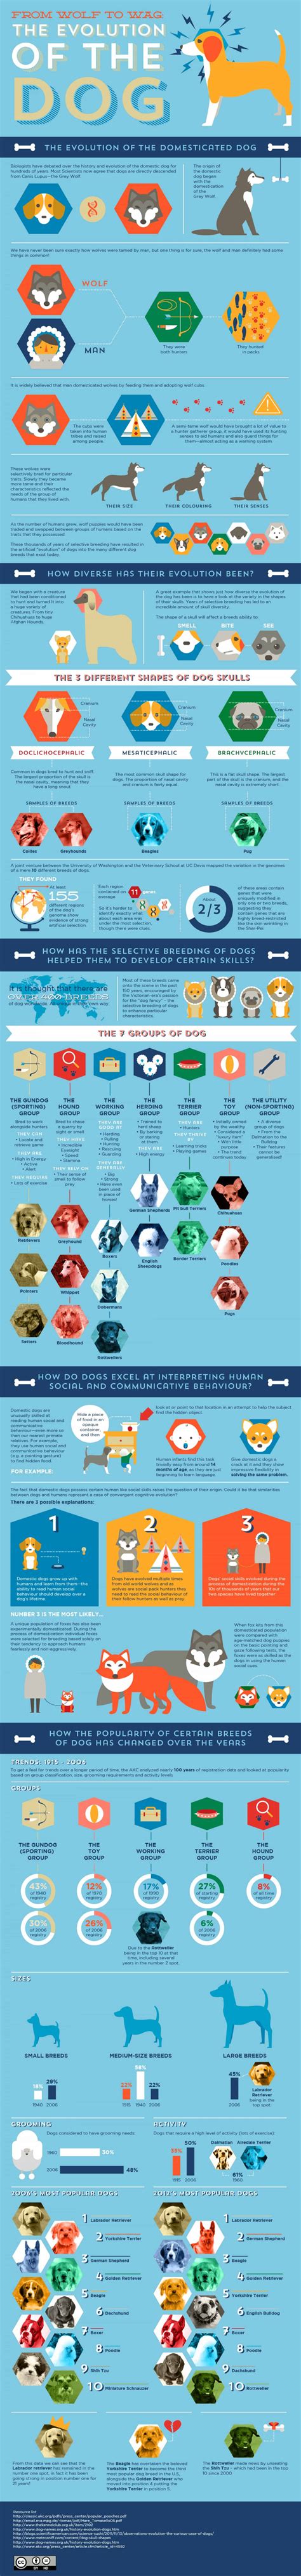 Woof Woof The Evolution Of The Dog Daily Infographic